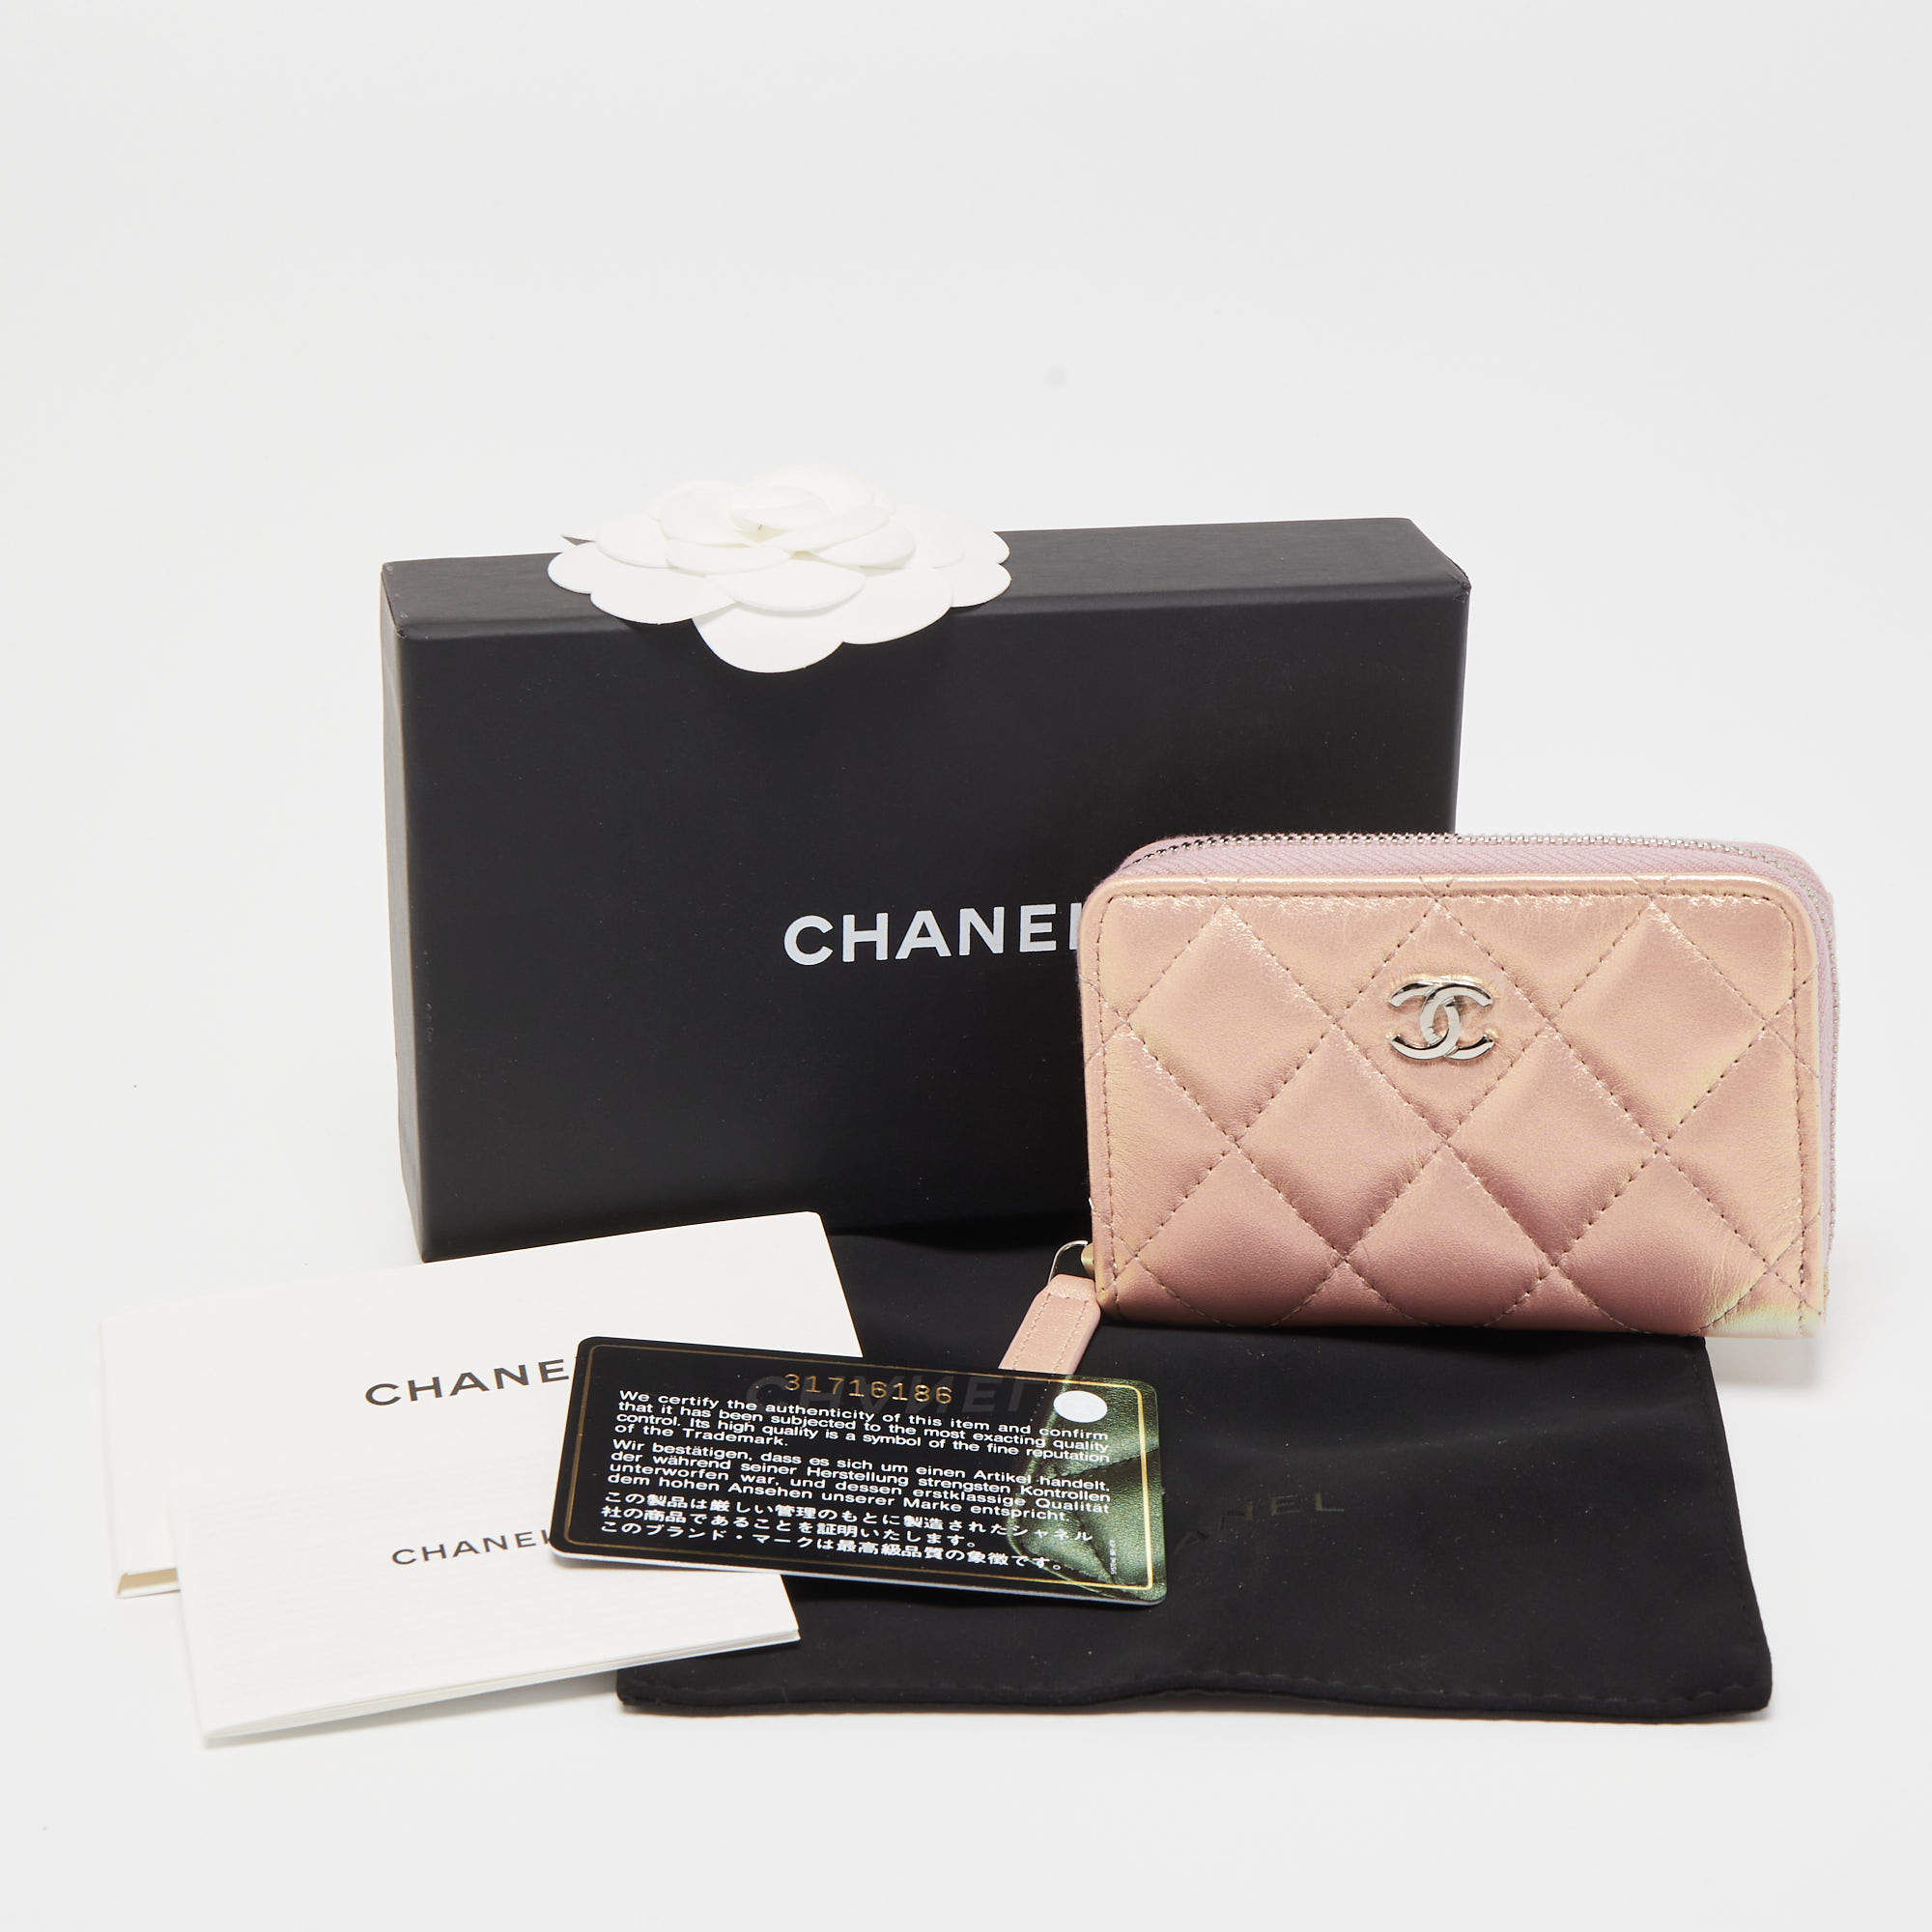 The Global Luxury Closet - Chanel 19S iridescent pink Zippy coin